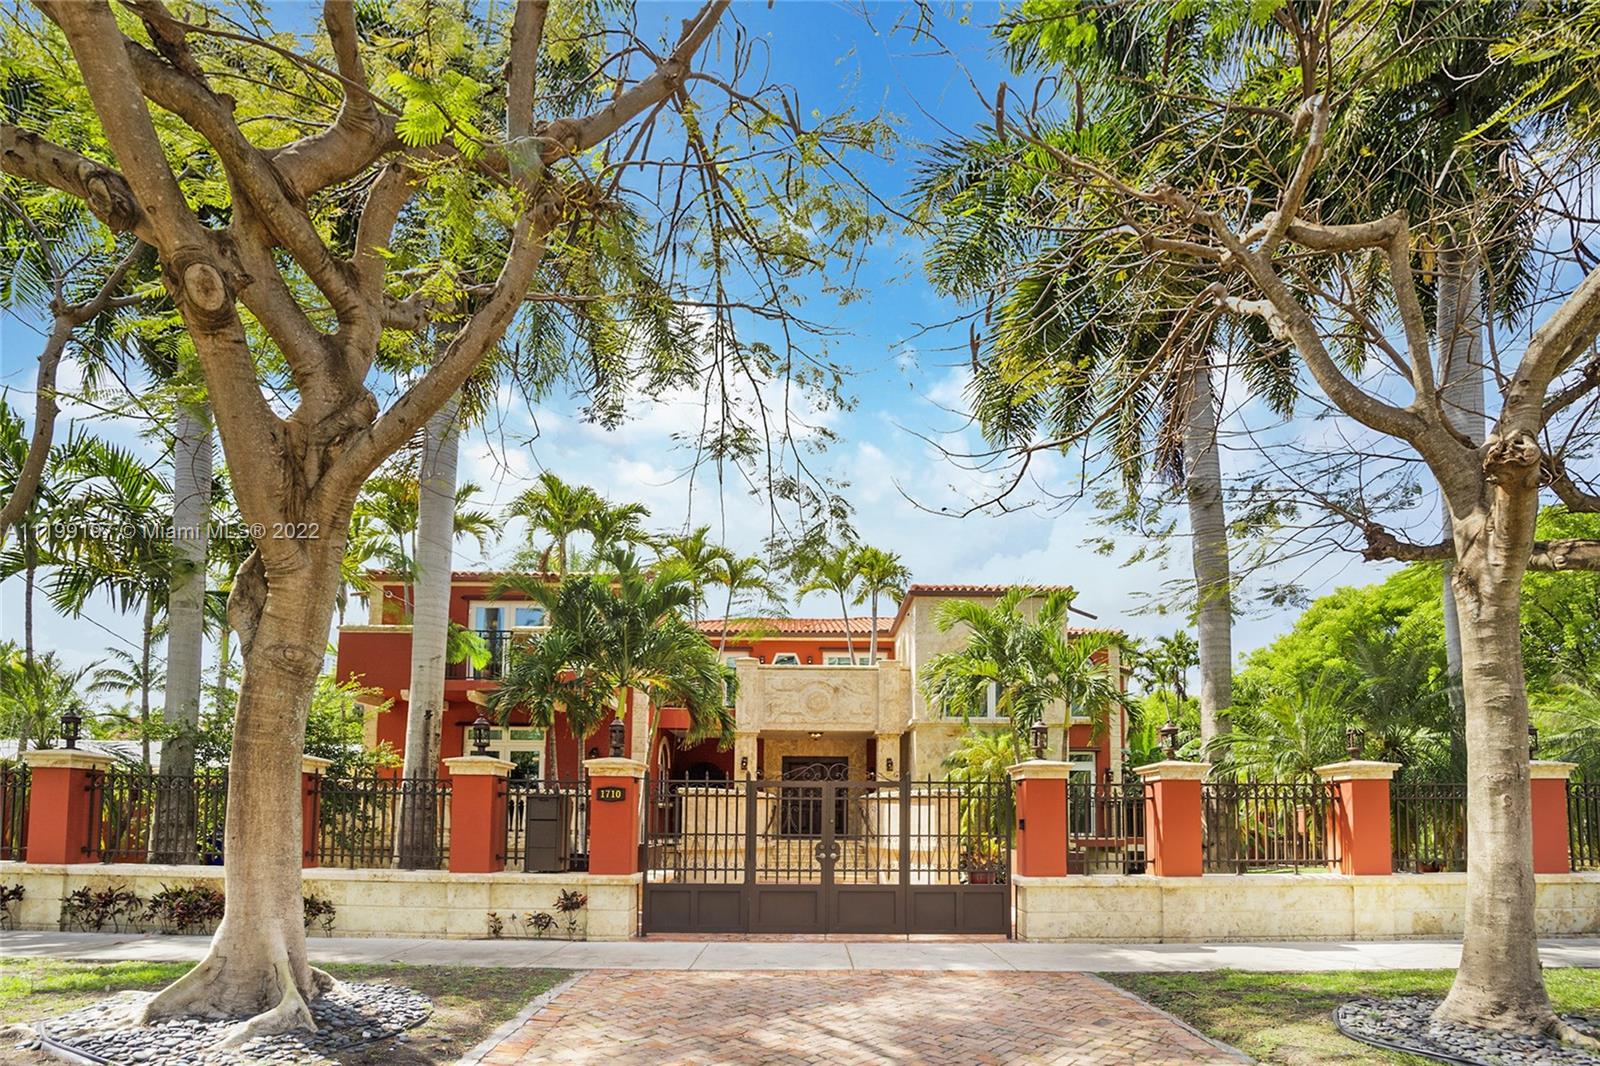 Magnificent estate built in 2007 gracing the historical S Miami Avenue, most desirable central location. Elegant gated entrance to grand salon, formal living rm, dining rm & glass enclsd sun room. Gourmet kitchen, stately office, theatre, rec rm, & enclosed terrace all on main floor, 7 bed, 7 bathrms and one ½ bath, glistening pool, spa & summer kitchen. Below large gym, storage closets & 3-car garage. Fine finishings incld Shucco Impact windows/doors, solid concrete roof, nat stone floors/slabs, boutique style closets, prof decorated with built-ins & spectacular flr plan. Whether entertaining dignitaries, socialites, or family, this home exudes elegance, sophistication & grace. Proximity to Brickell, S Beach, airports, top schools, hospitals, Grove, everything! Showings to begin May 14th.